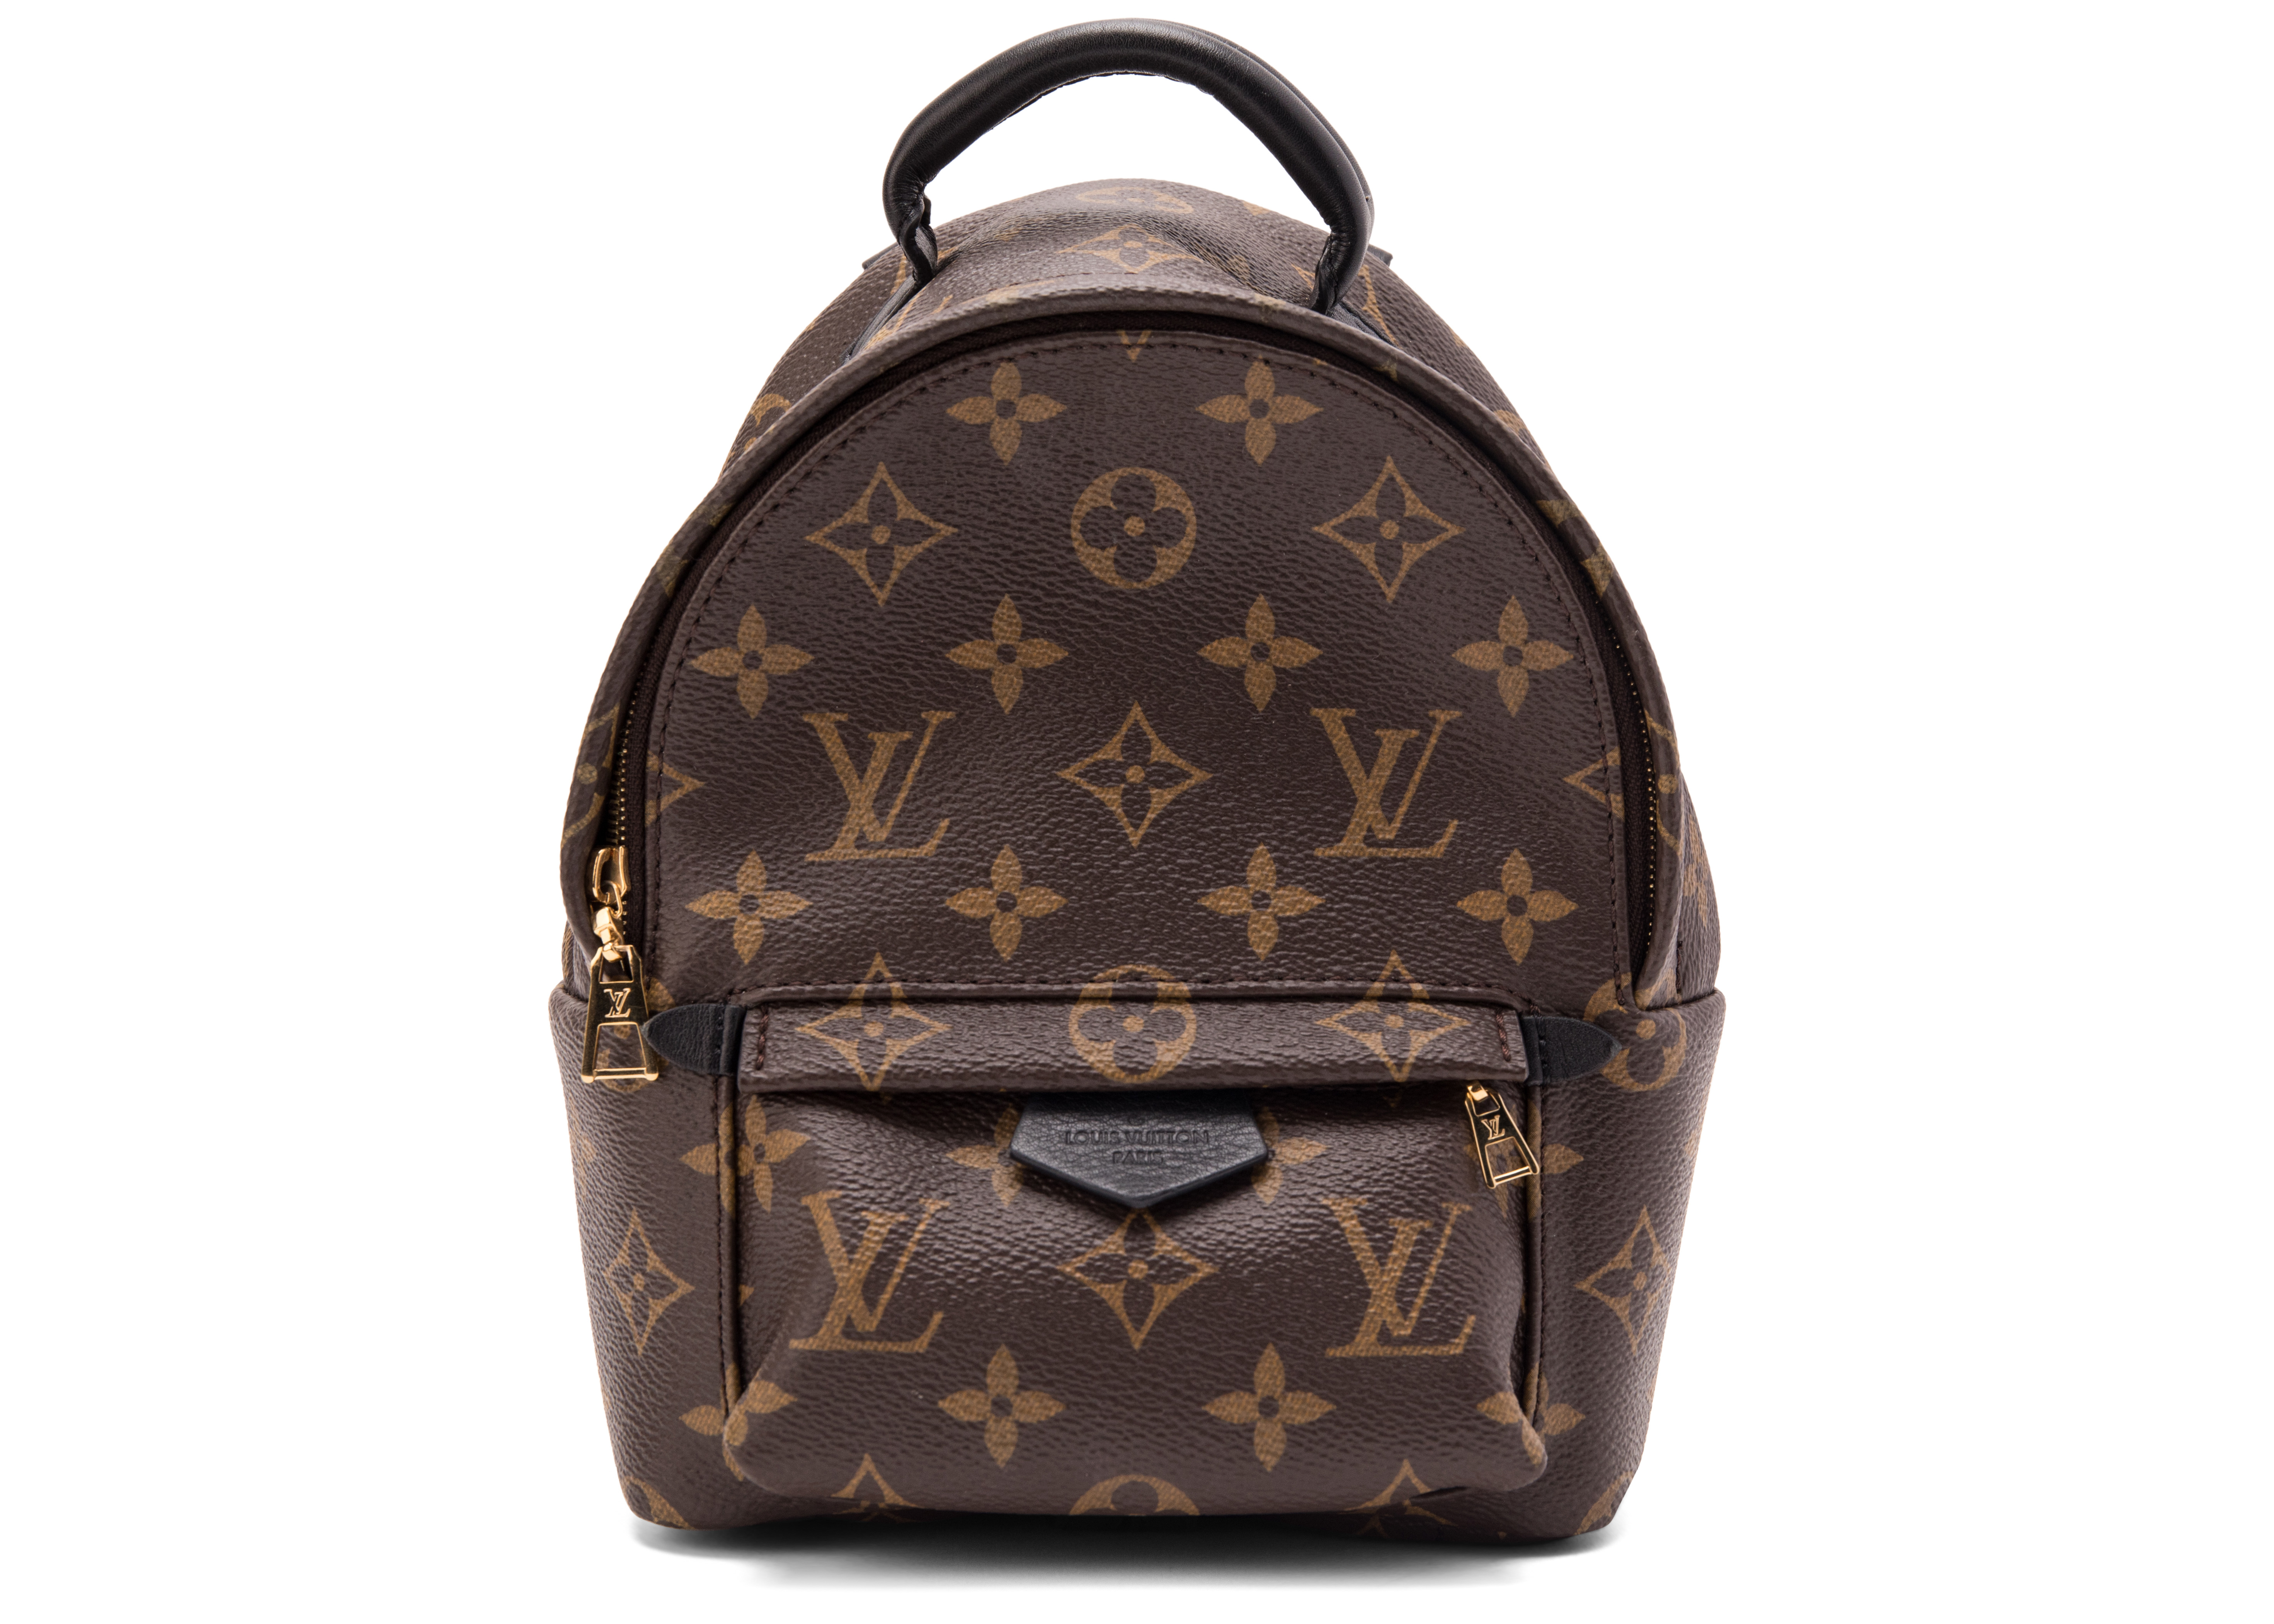 ✔︎LouisVuitton backpack リュック/バックパック バッグ メンズ 在庫限り送料無料